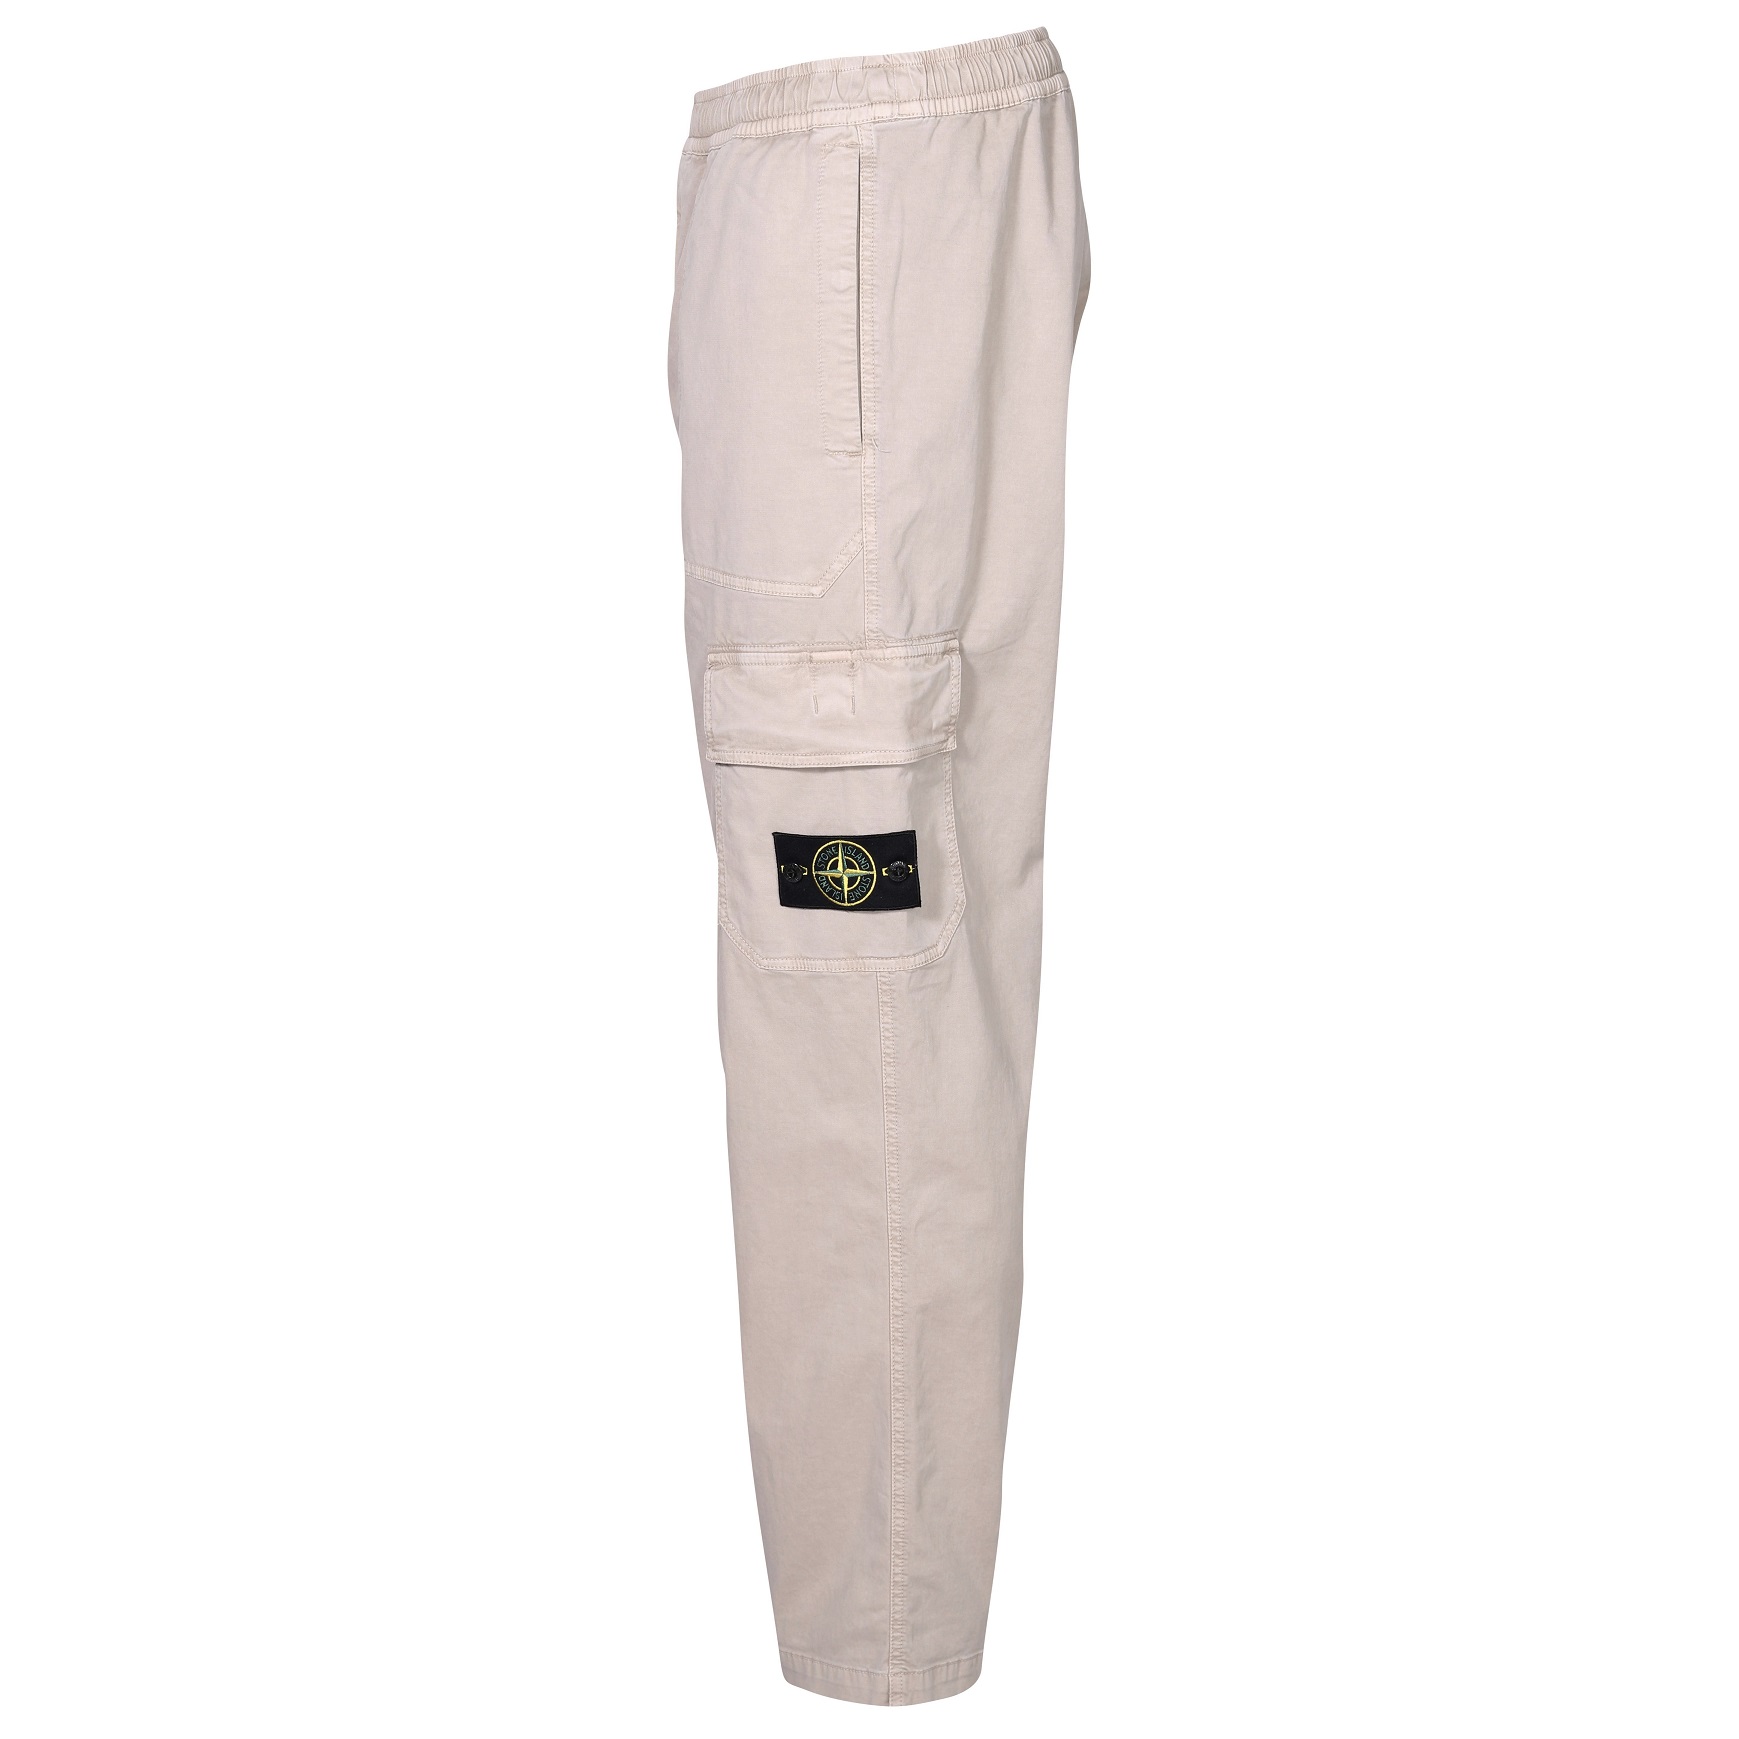 STONE ISLAND Loose Cargo Pant in Washed Dove Grey 29